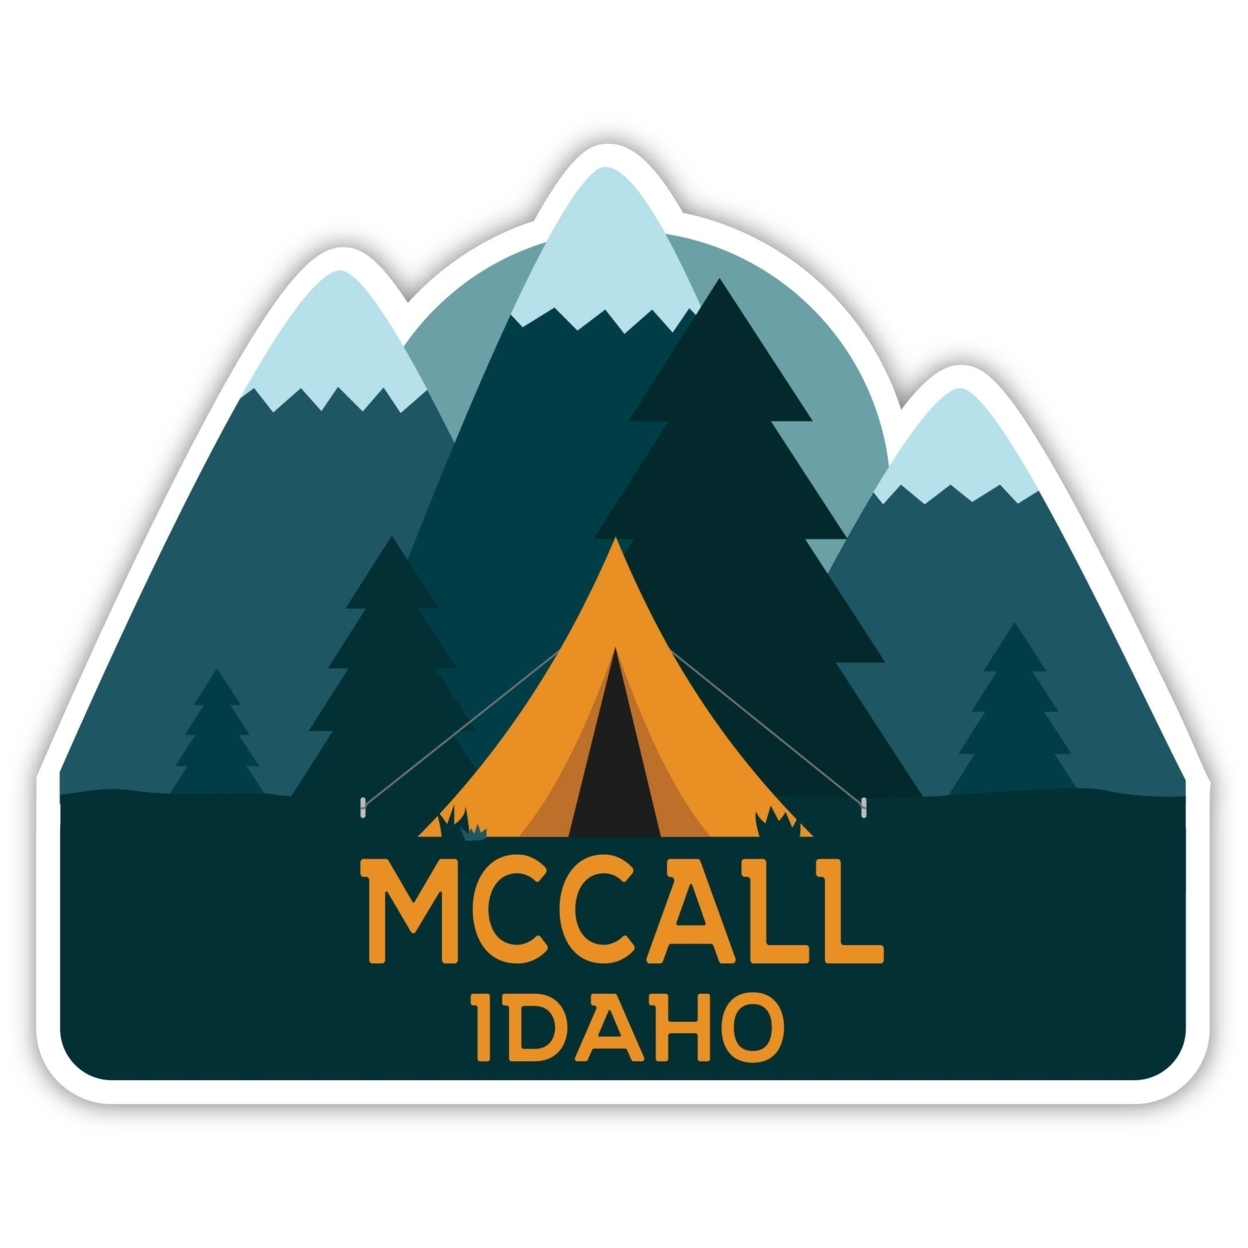 Mccall Idaho Souvenir Decorative Stickers (Choose Theme And Size) - 4-Inch, Camp Life